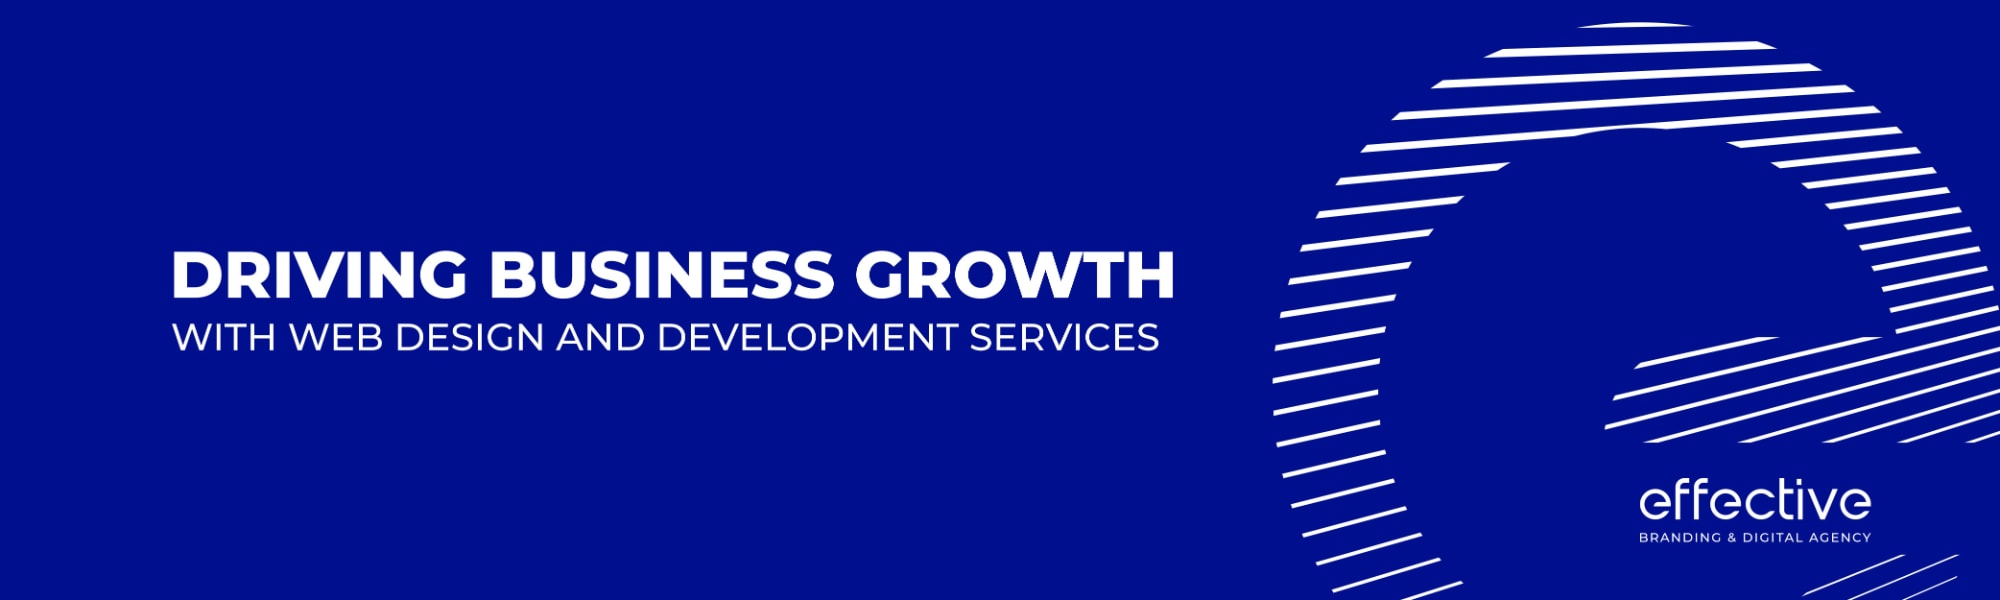 Driving Business Growth with Web Design and Development Services